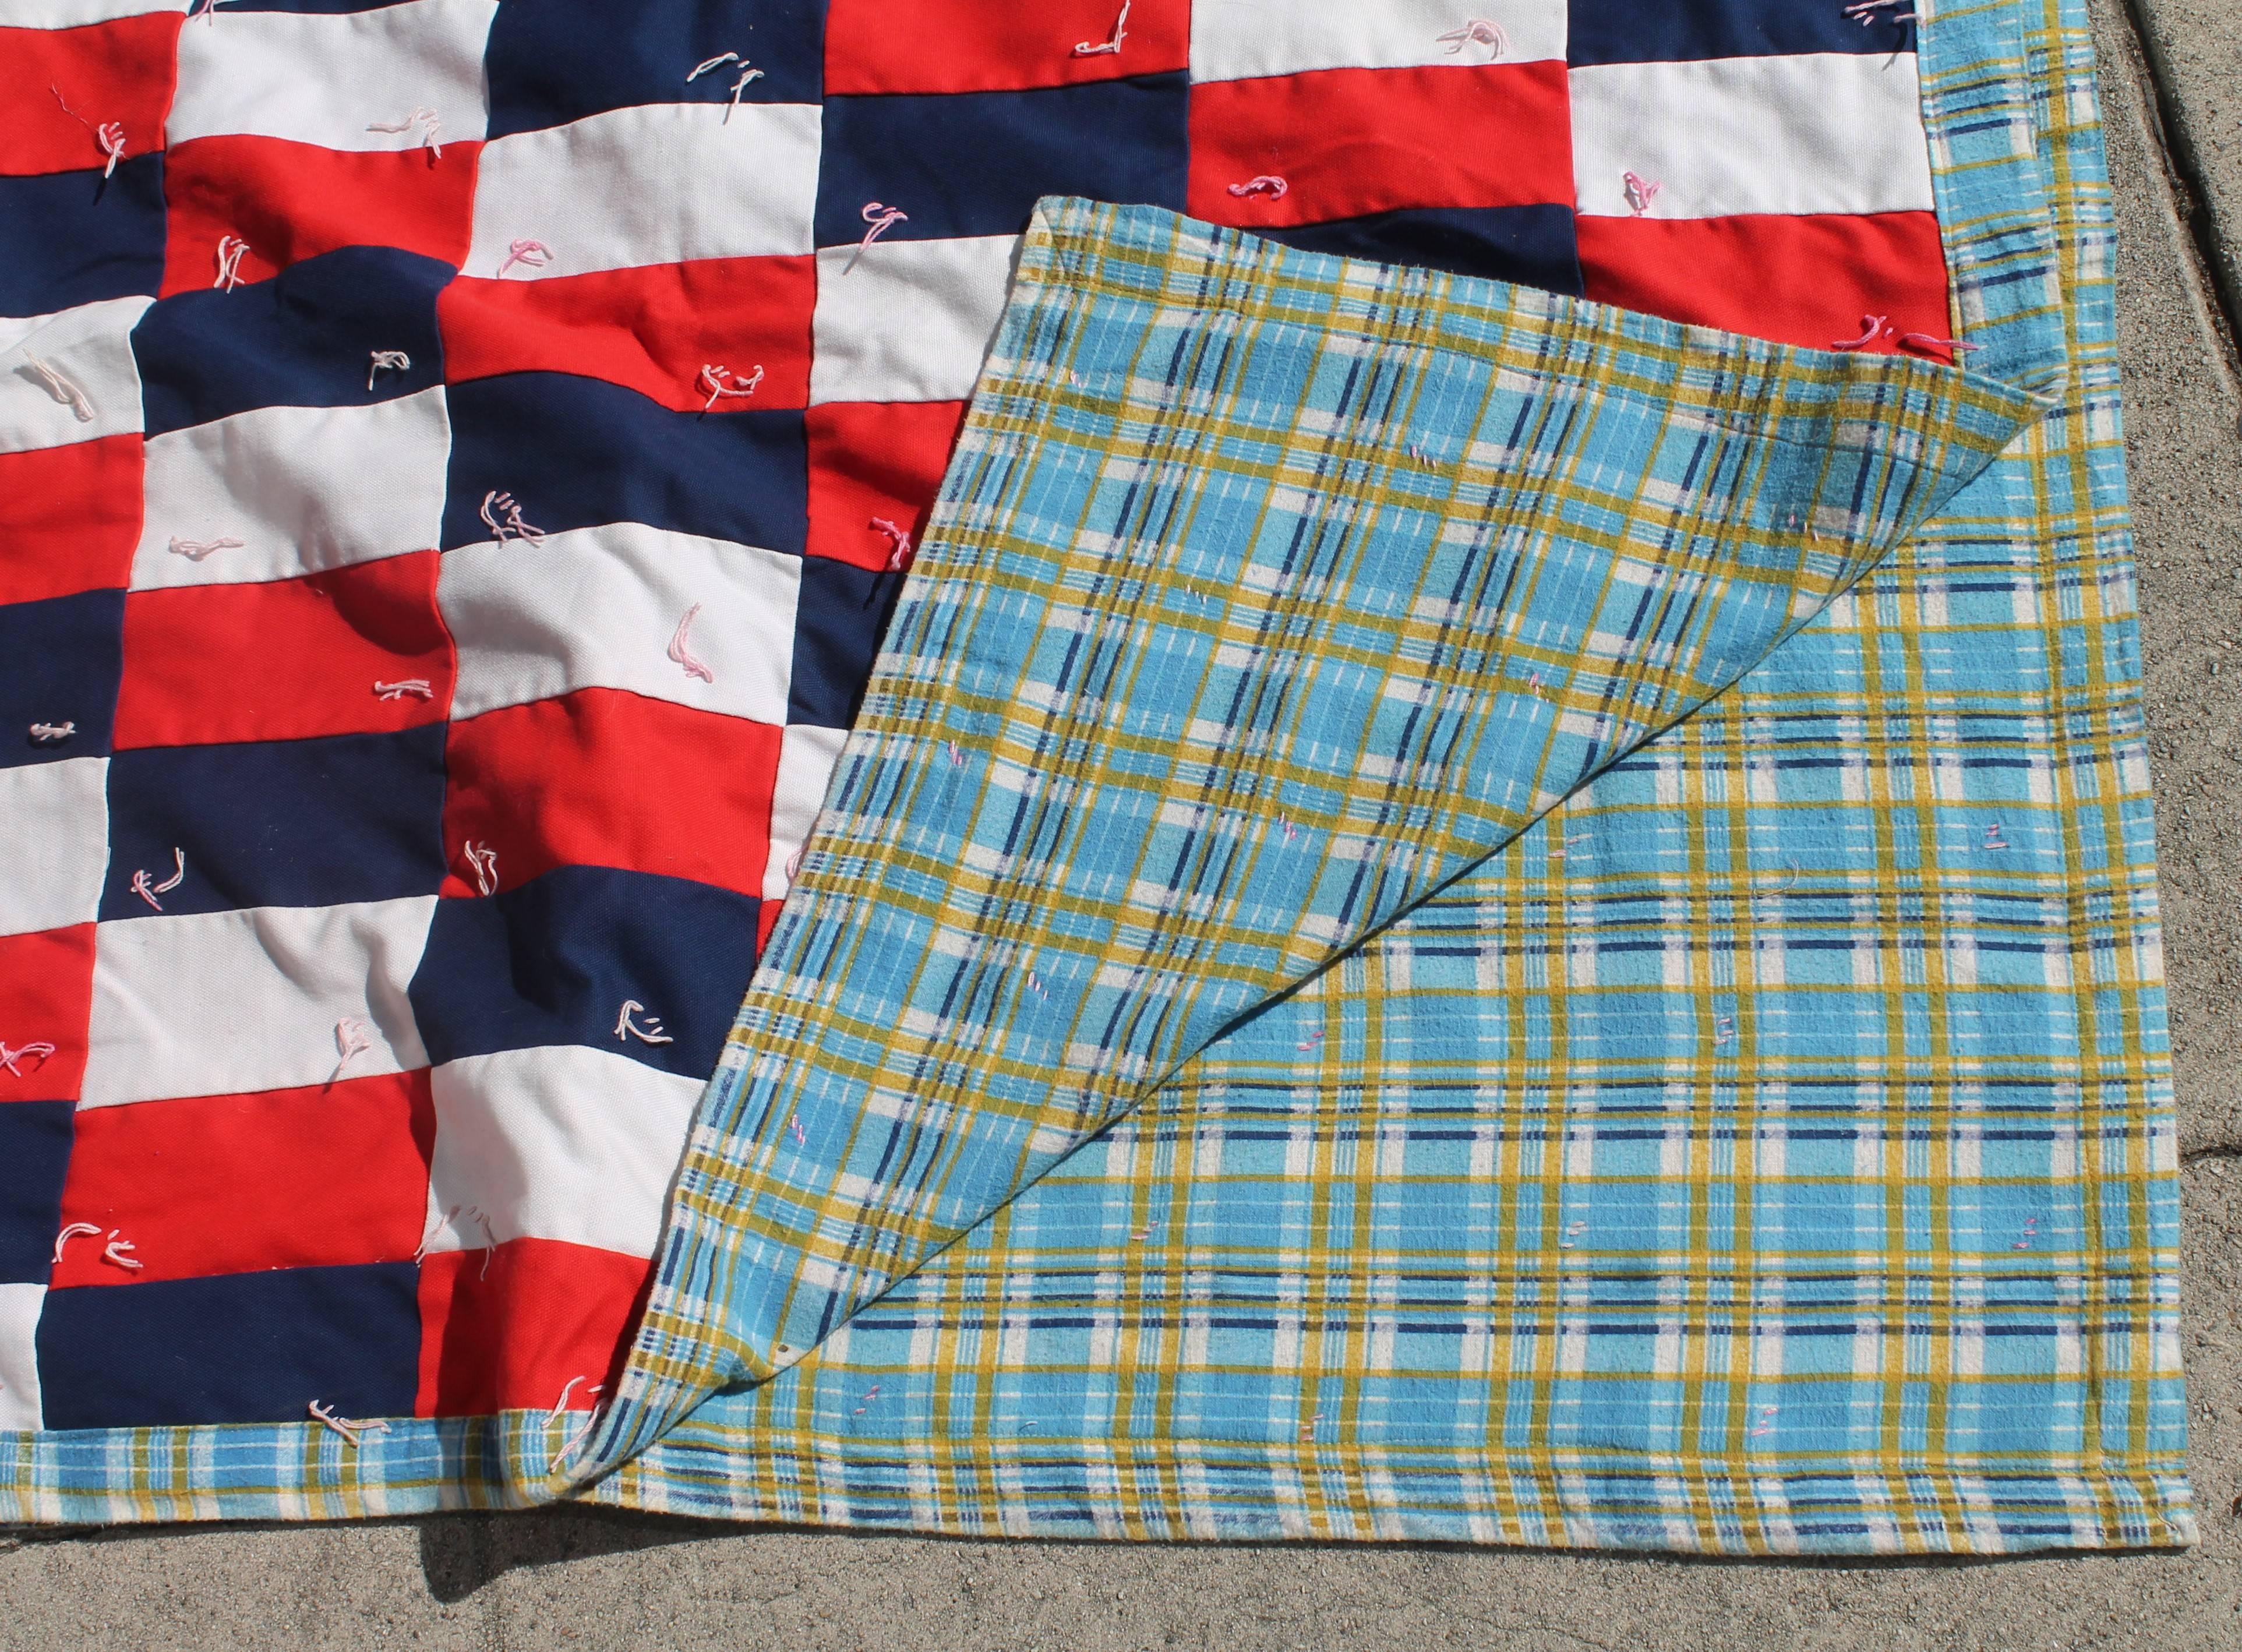 Hand-Crafted Patriotic Quilt in Building Blocks Pattern